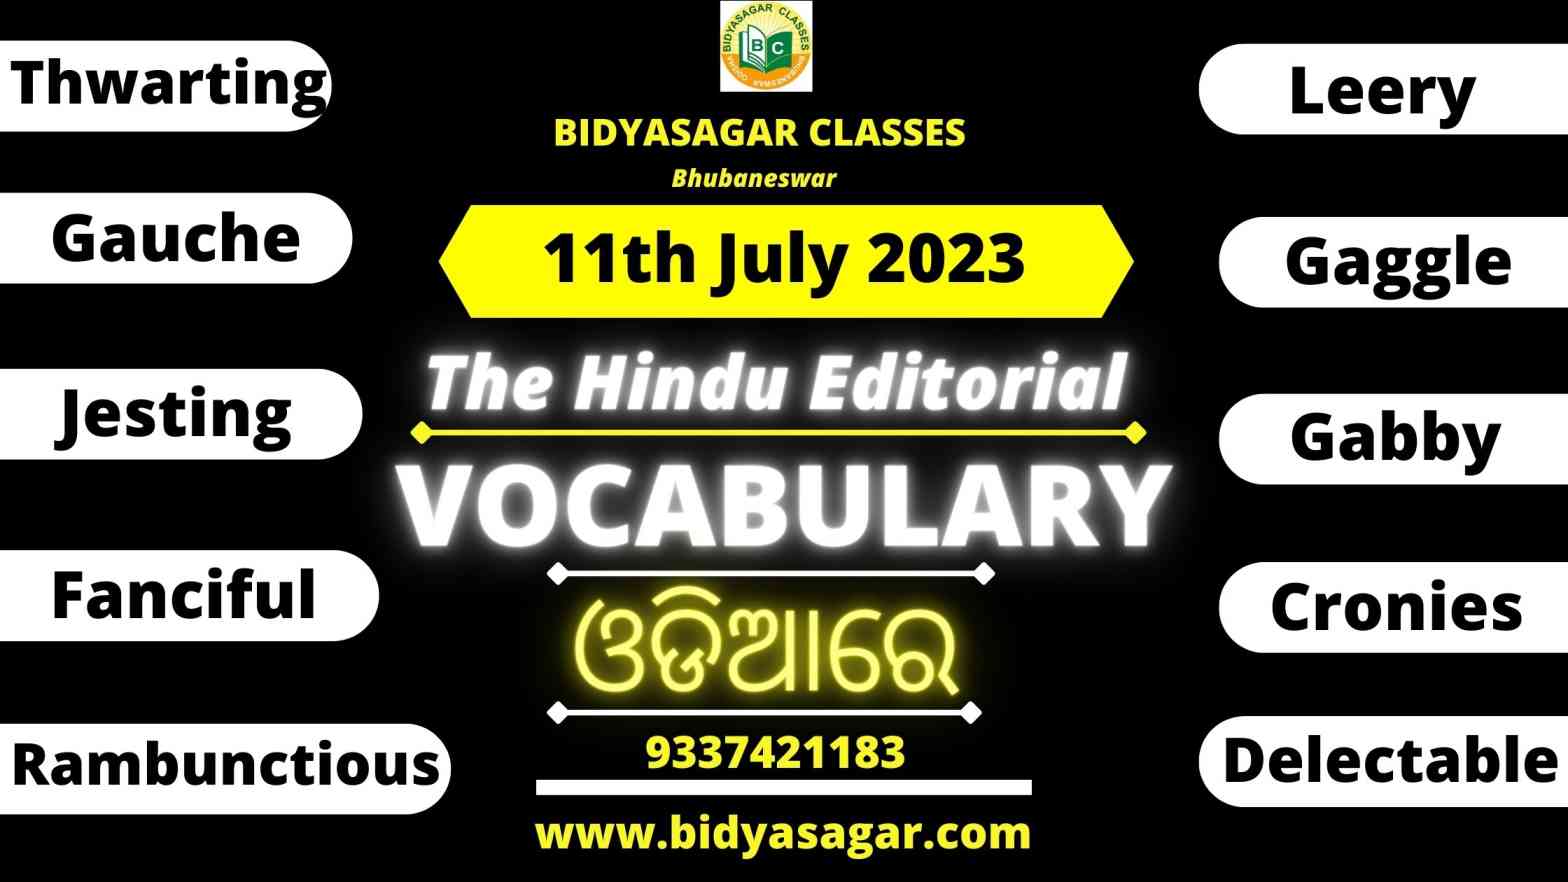 The Hindu Editorial Vocabulary of 11th July 2023